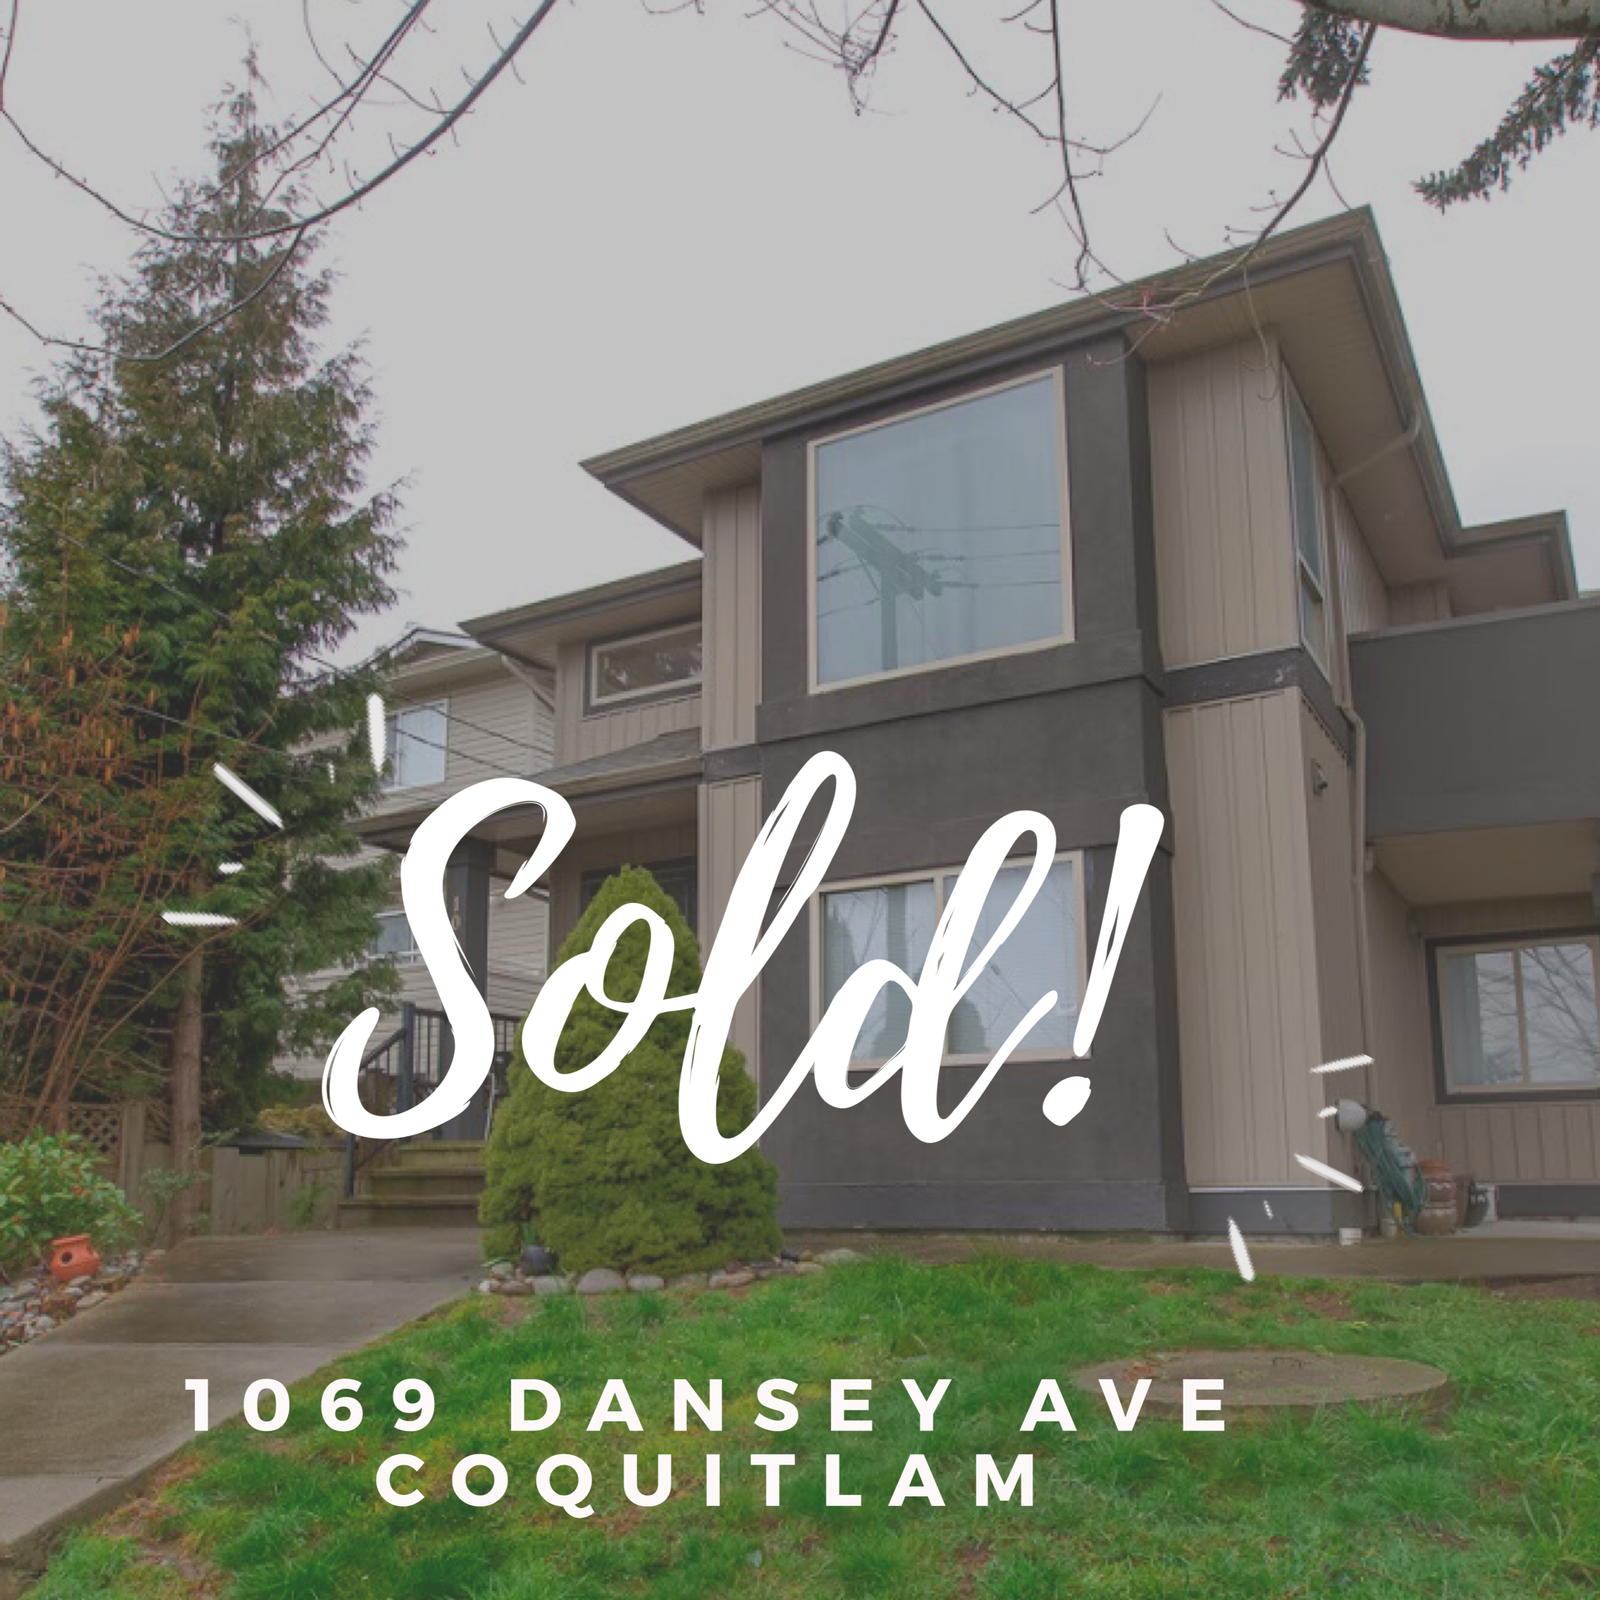 SOLD! 1069 Dansey Ave, Coquitlam